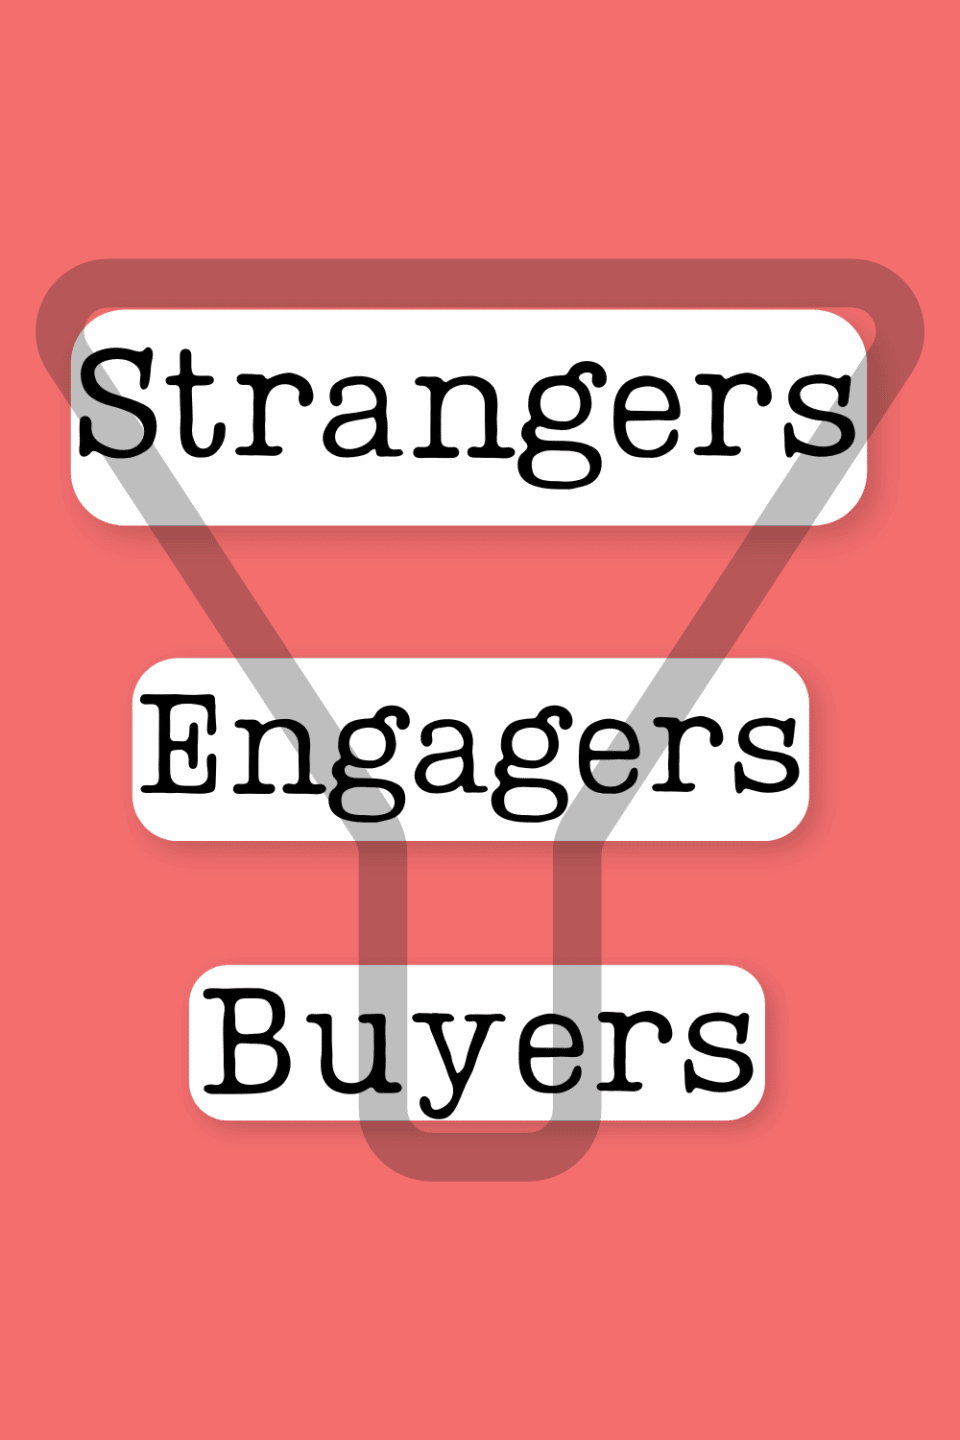 Graphics shows a basic representation of a marking funnel overlaid by a funnel image. Strangers at the top, engagers in the narrower middle, buyers in the narrowest section below.